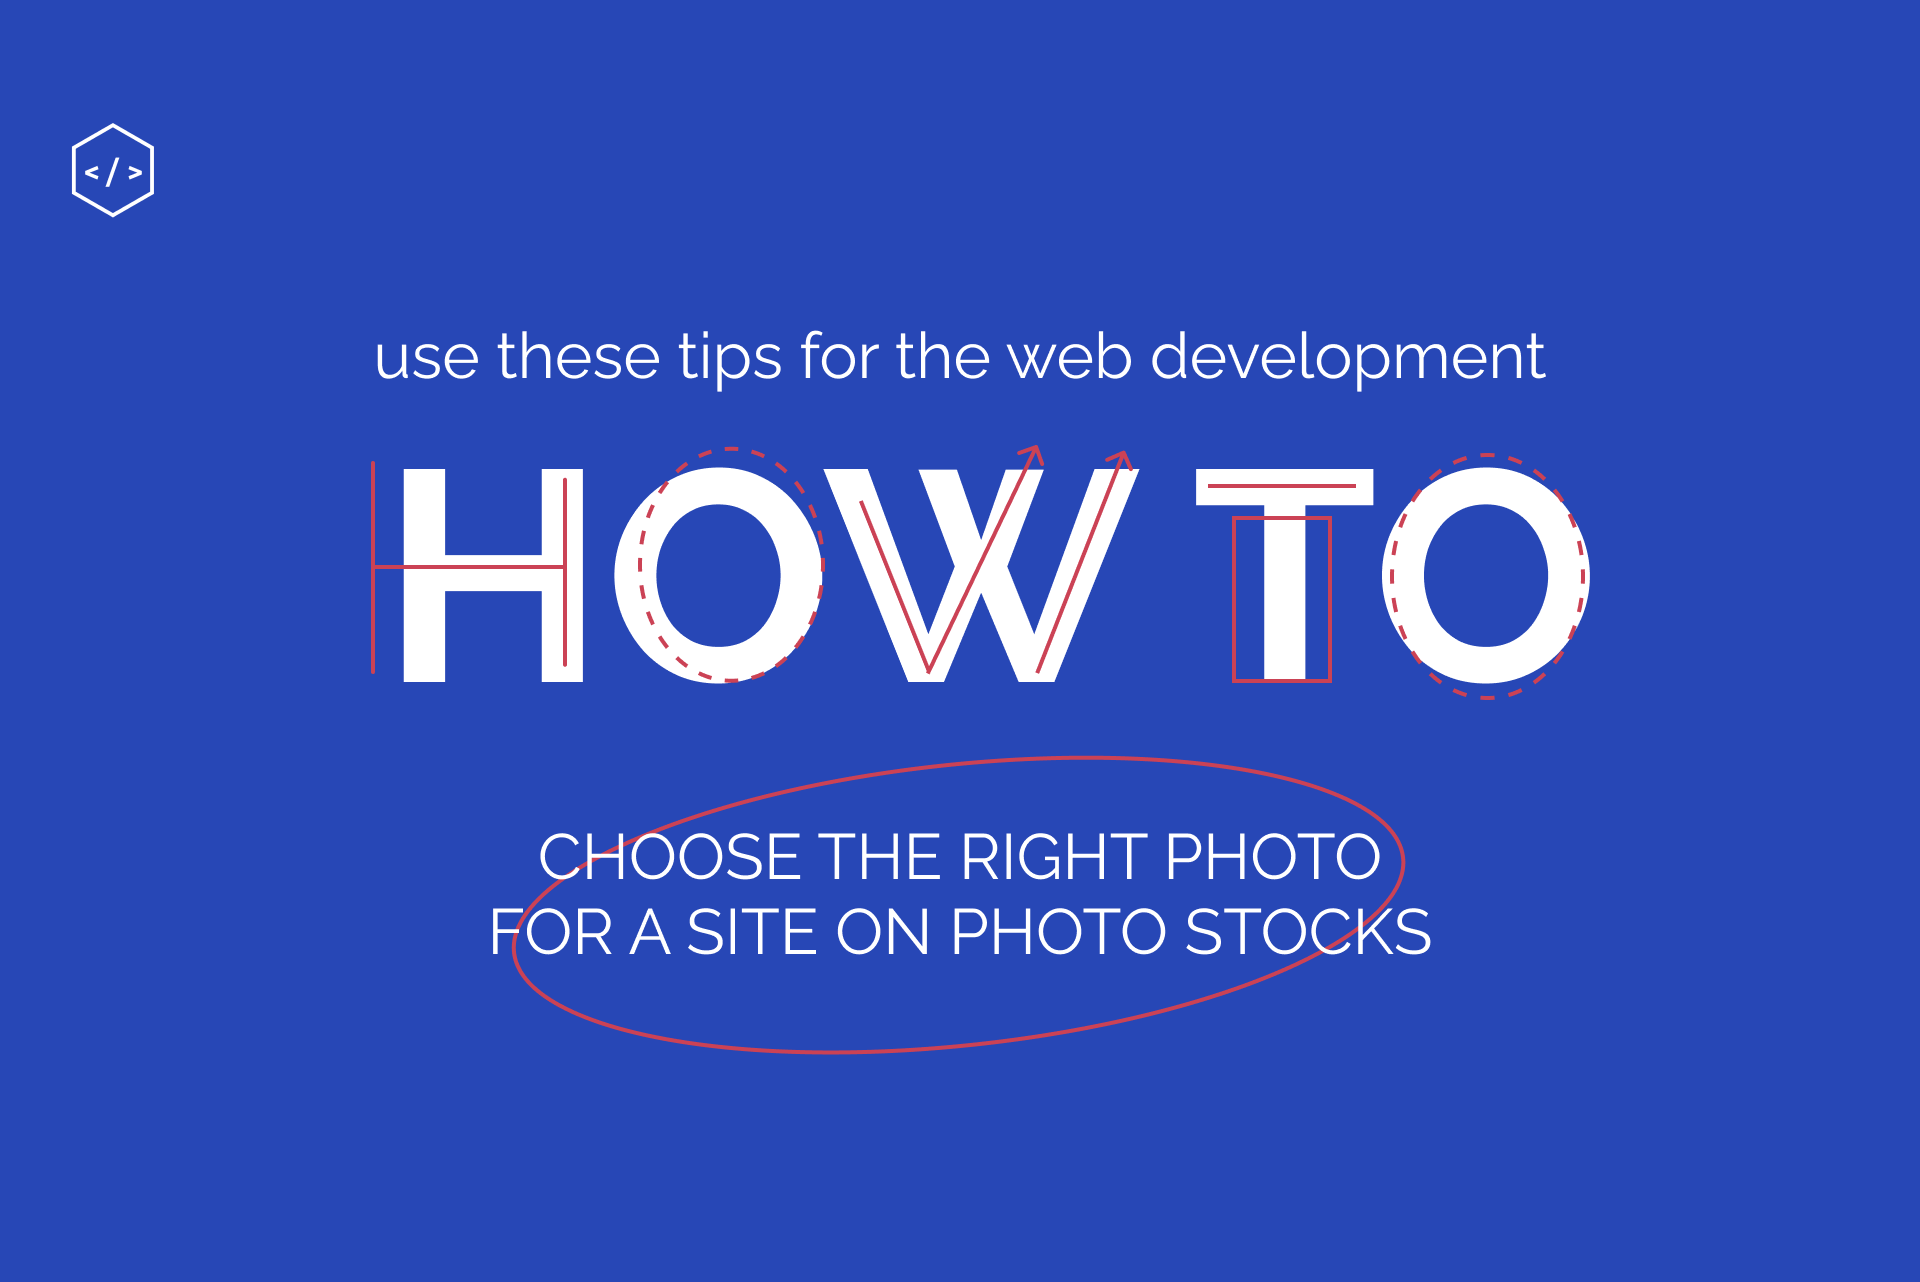 4 basic rules for choosing the right website photo